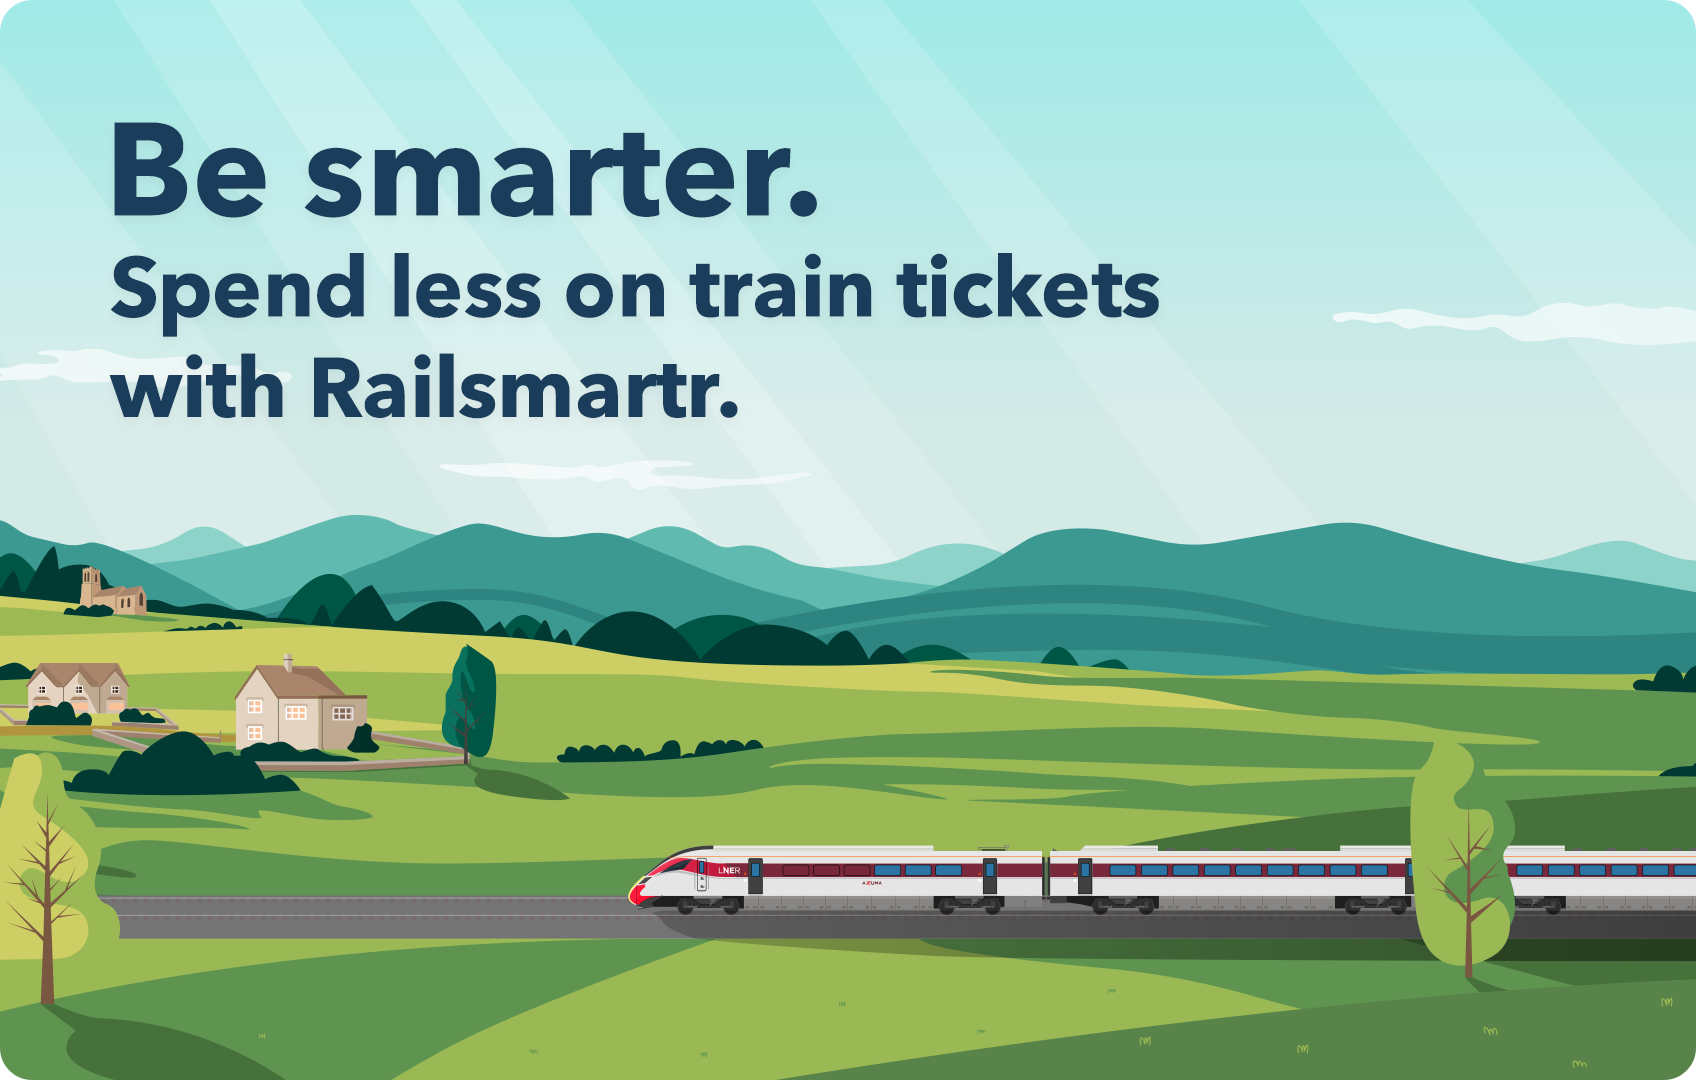 Be smarter. Spend less on train tickets with Railsmartr.